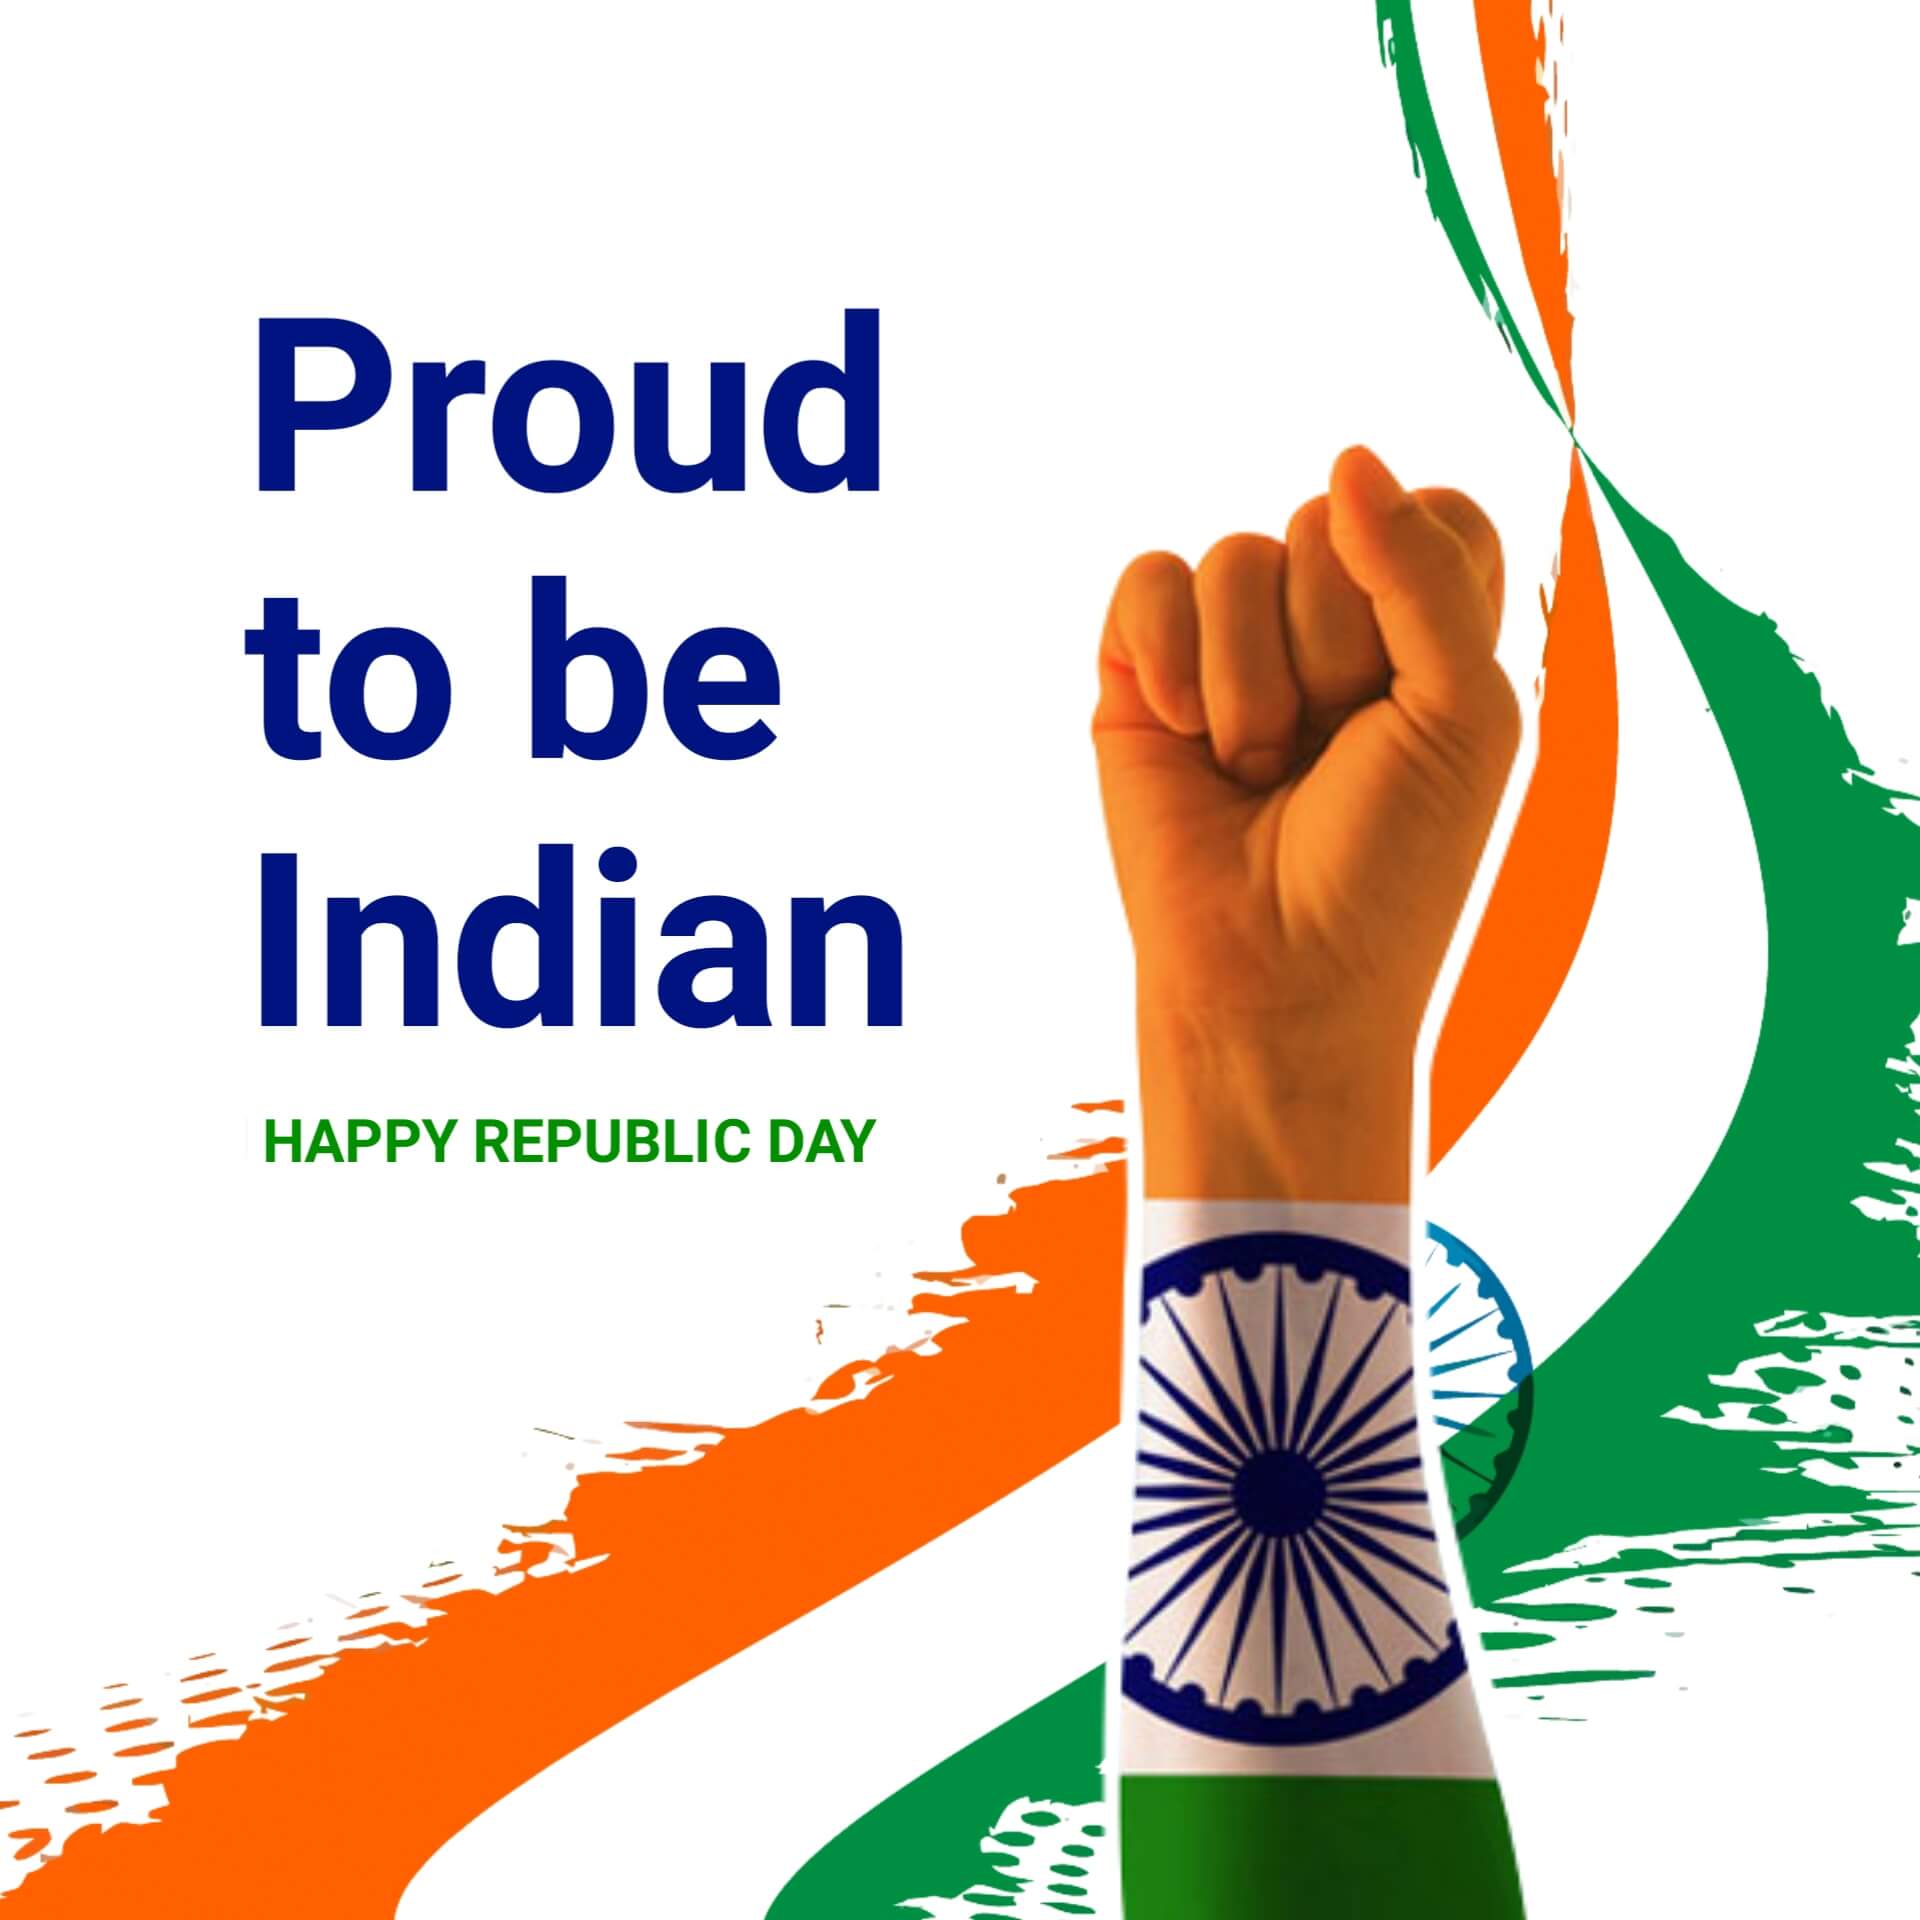 Proud to be Indian Republic Day Image